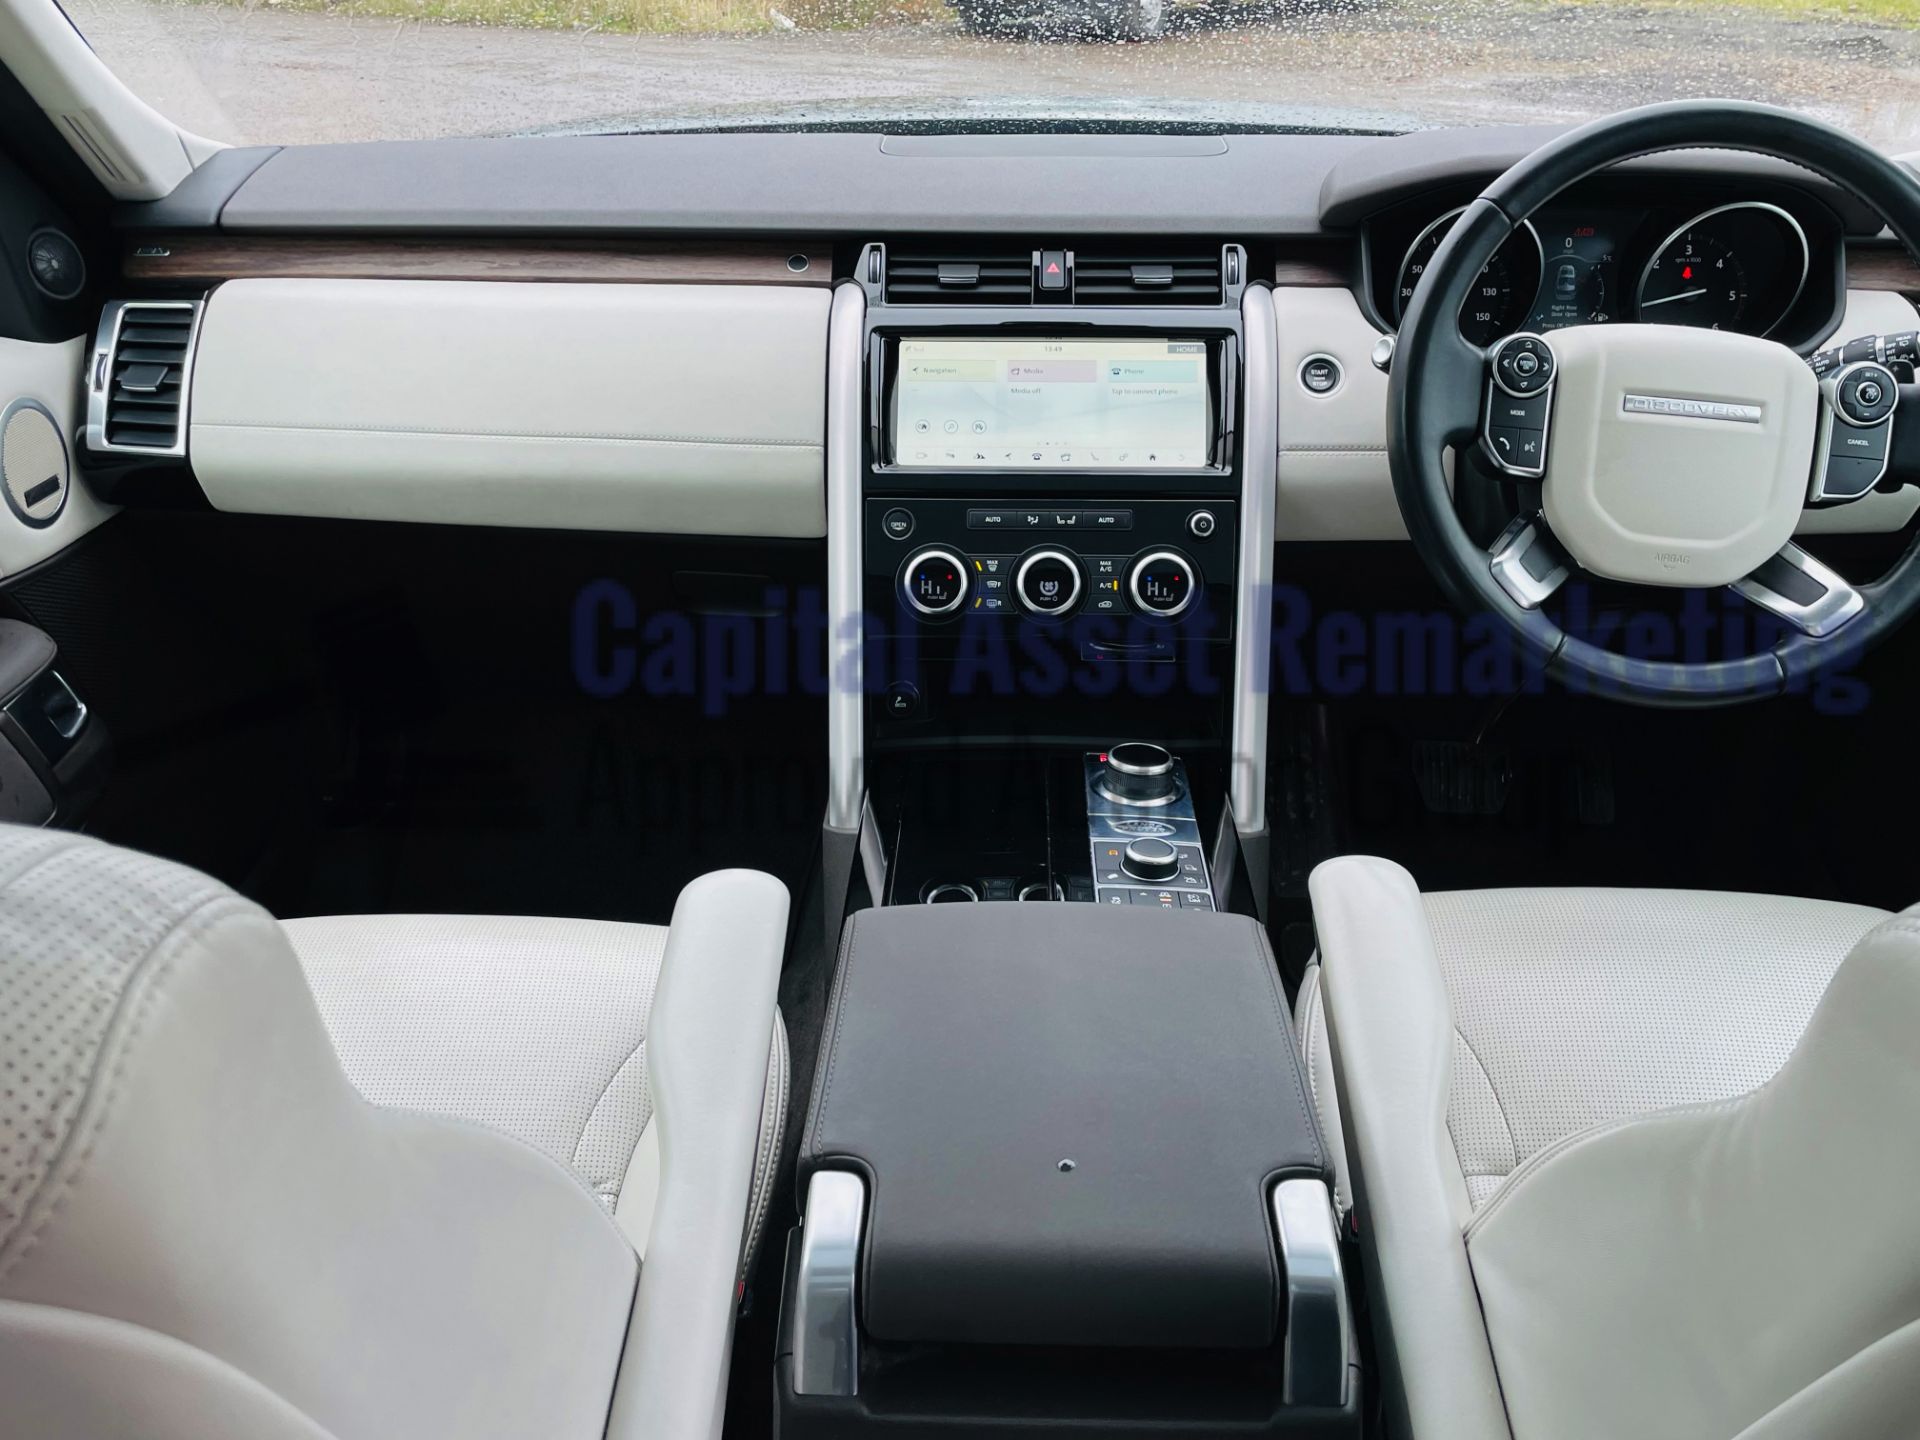 LAND ROVER DISCOVERY 5 *HSE EDITION* 7 SEATER SUV (2017 EURO 6) 8 SPEED AUTO - PAN ROOF *HUGE SPEC* - Image 37 of 64